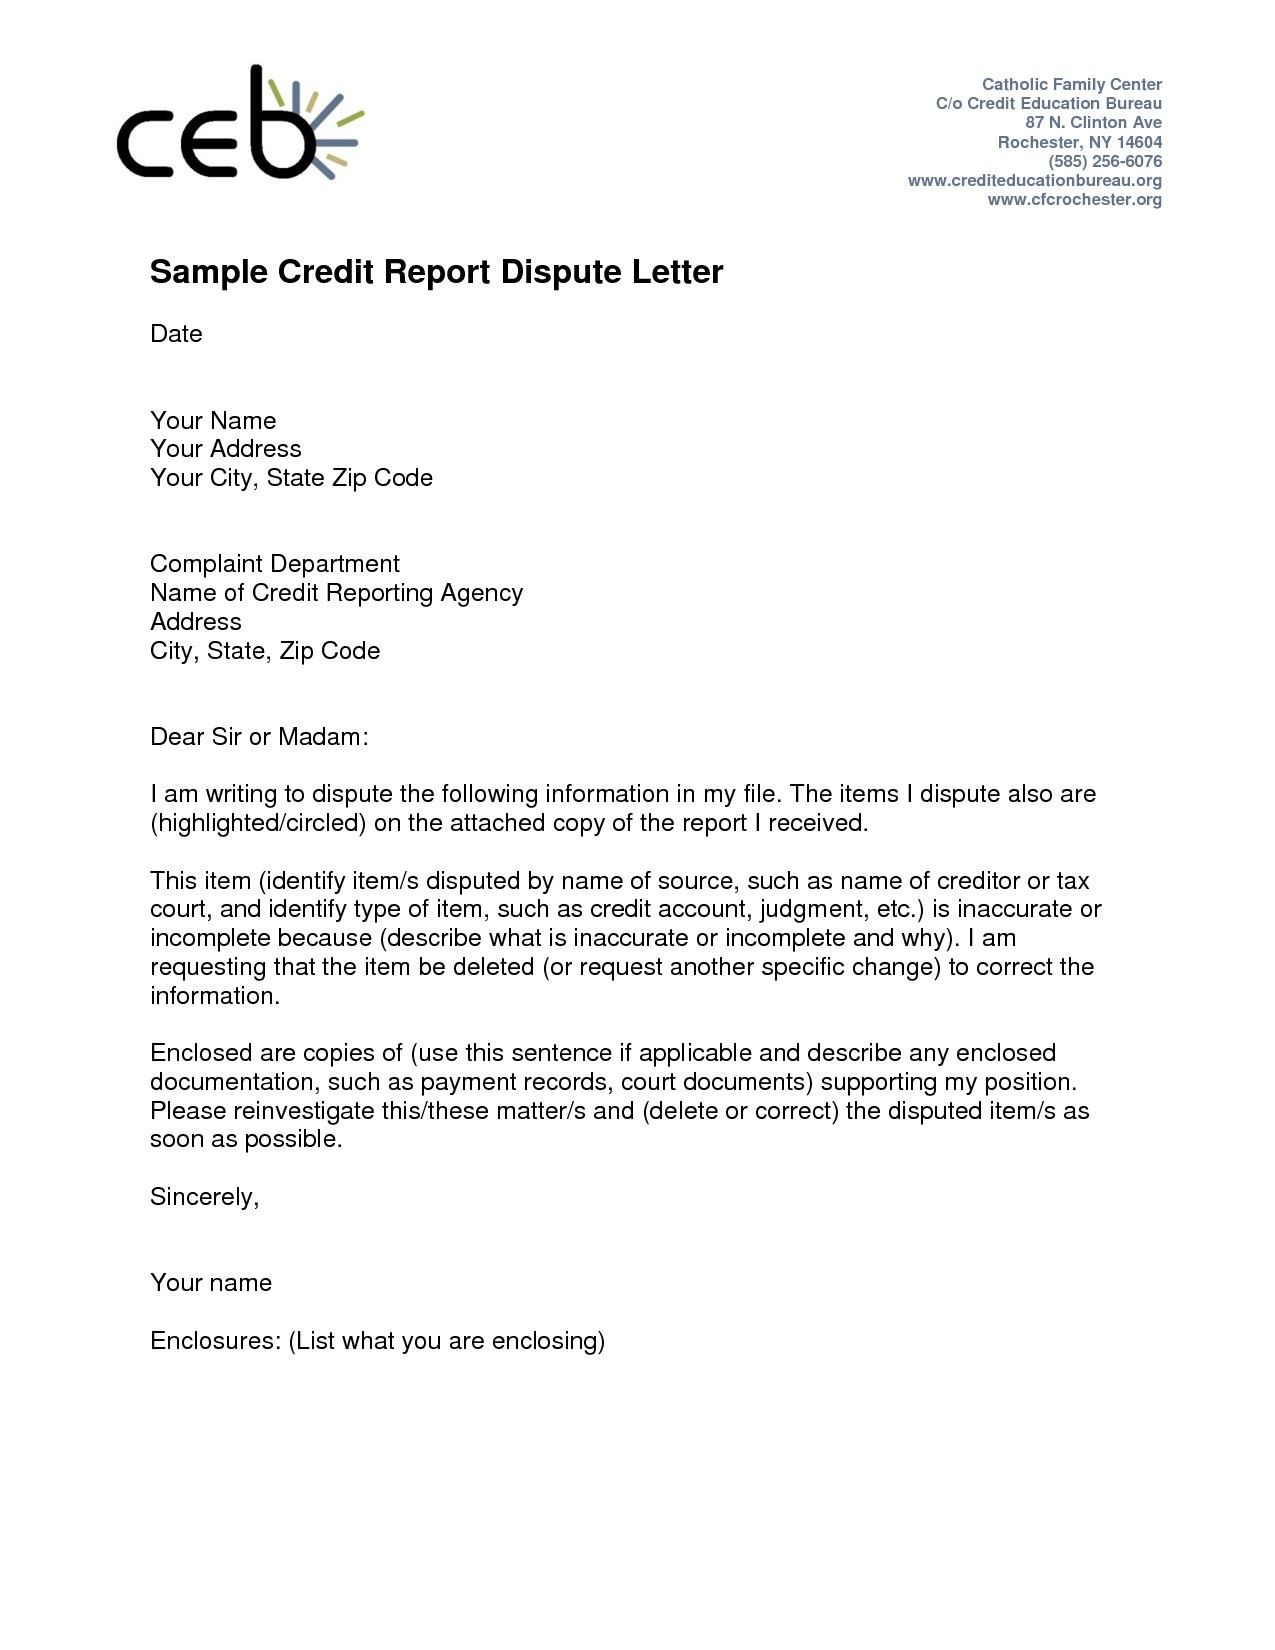 experian-dispute-letter-template-collection-letter-template-collection